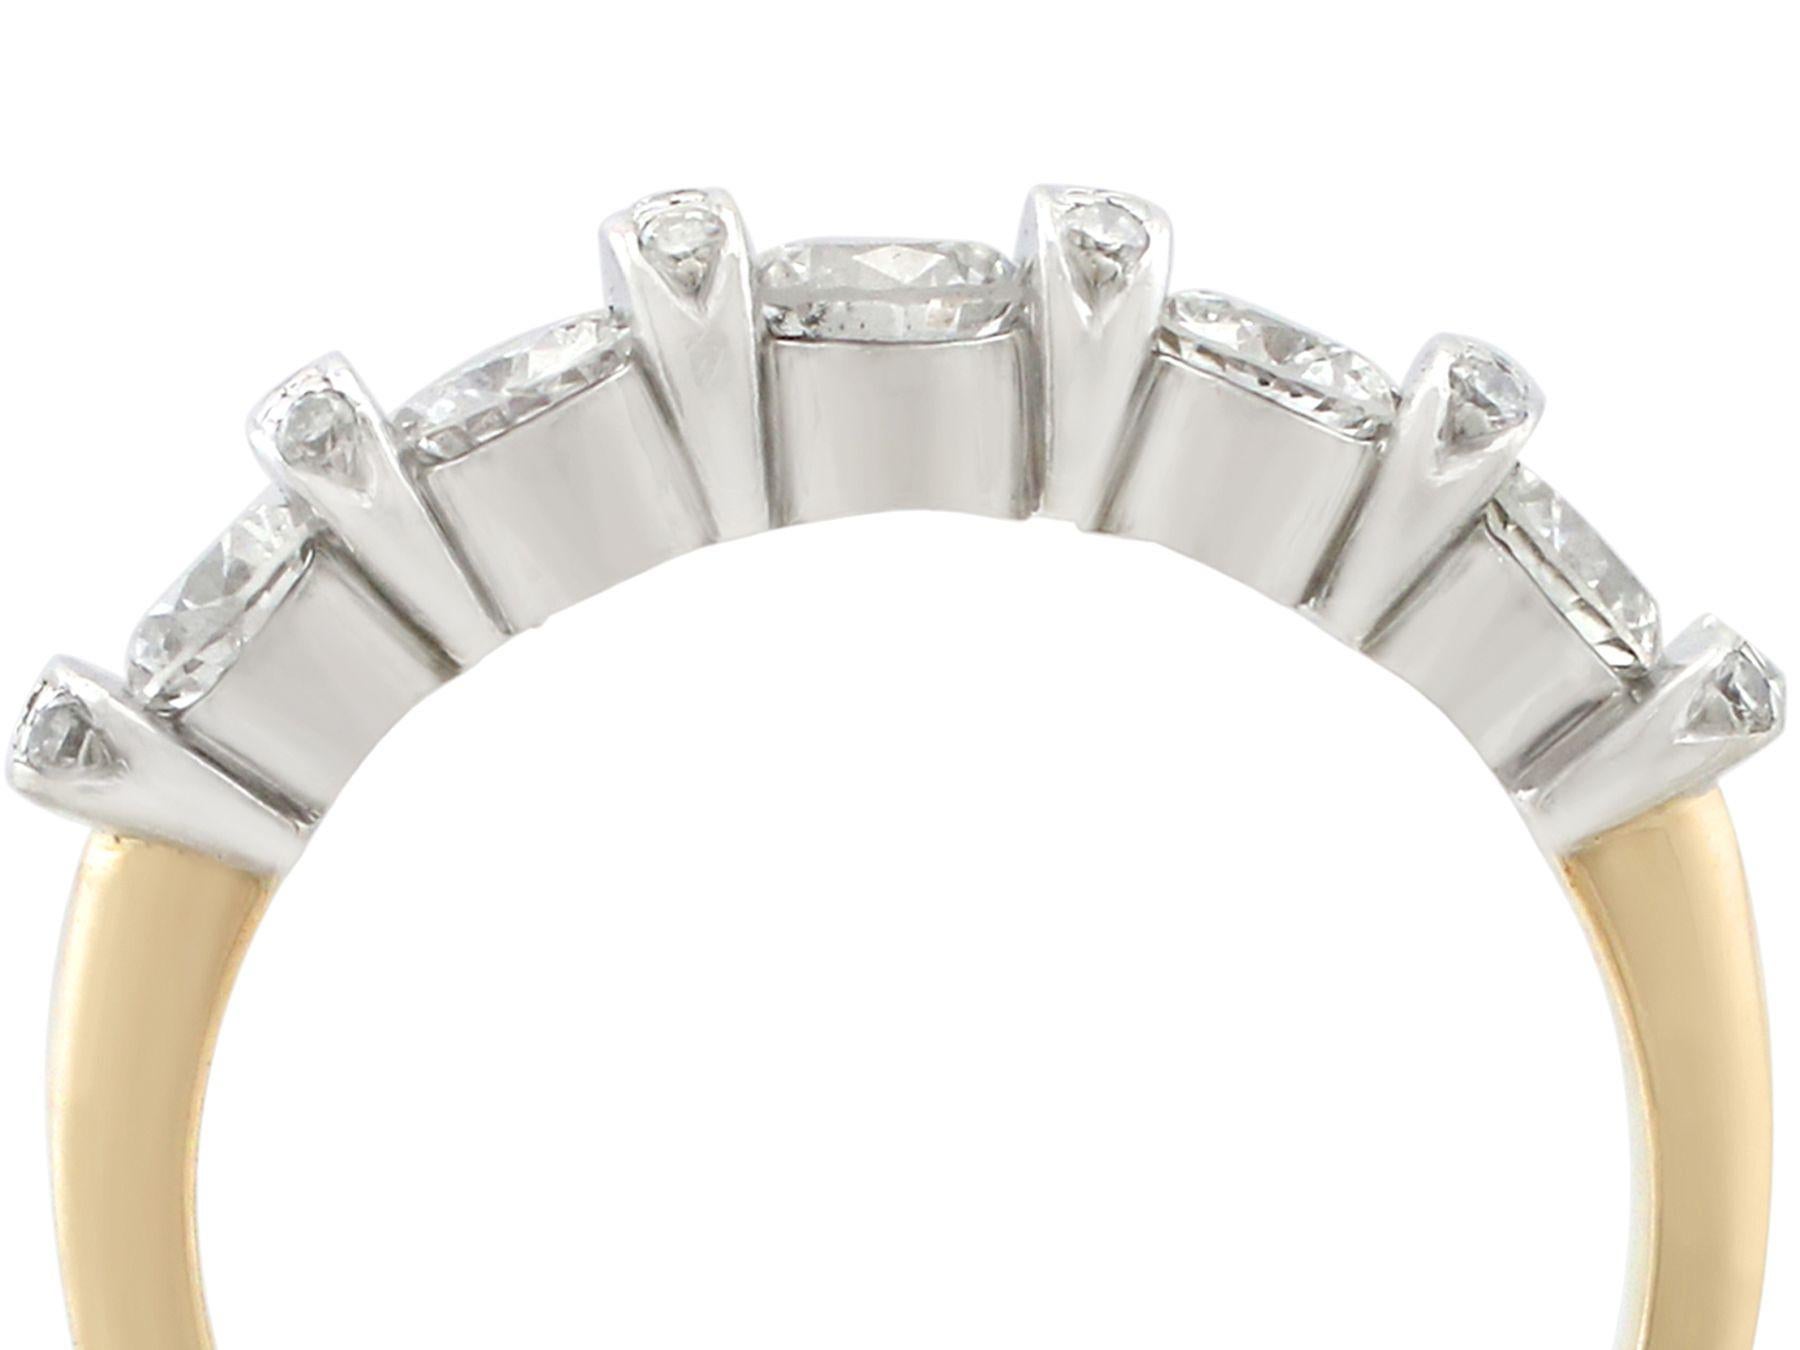 An impressive vintage 0.80 carat diamond and 14 karat yellow gold, 14 karat white gold set half eternity ring; part of our diverse antique jewelry collections.

This fine and impressive diamond half eternity ring has been crafted in 14k yellow gold